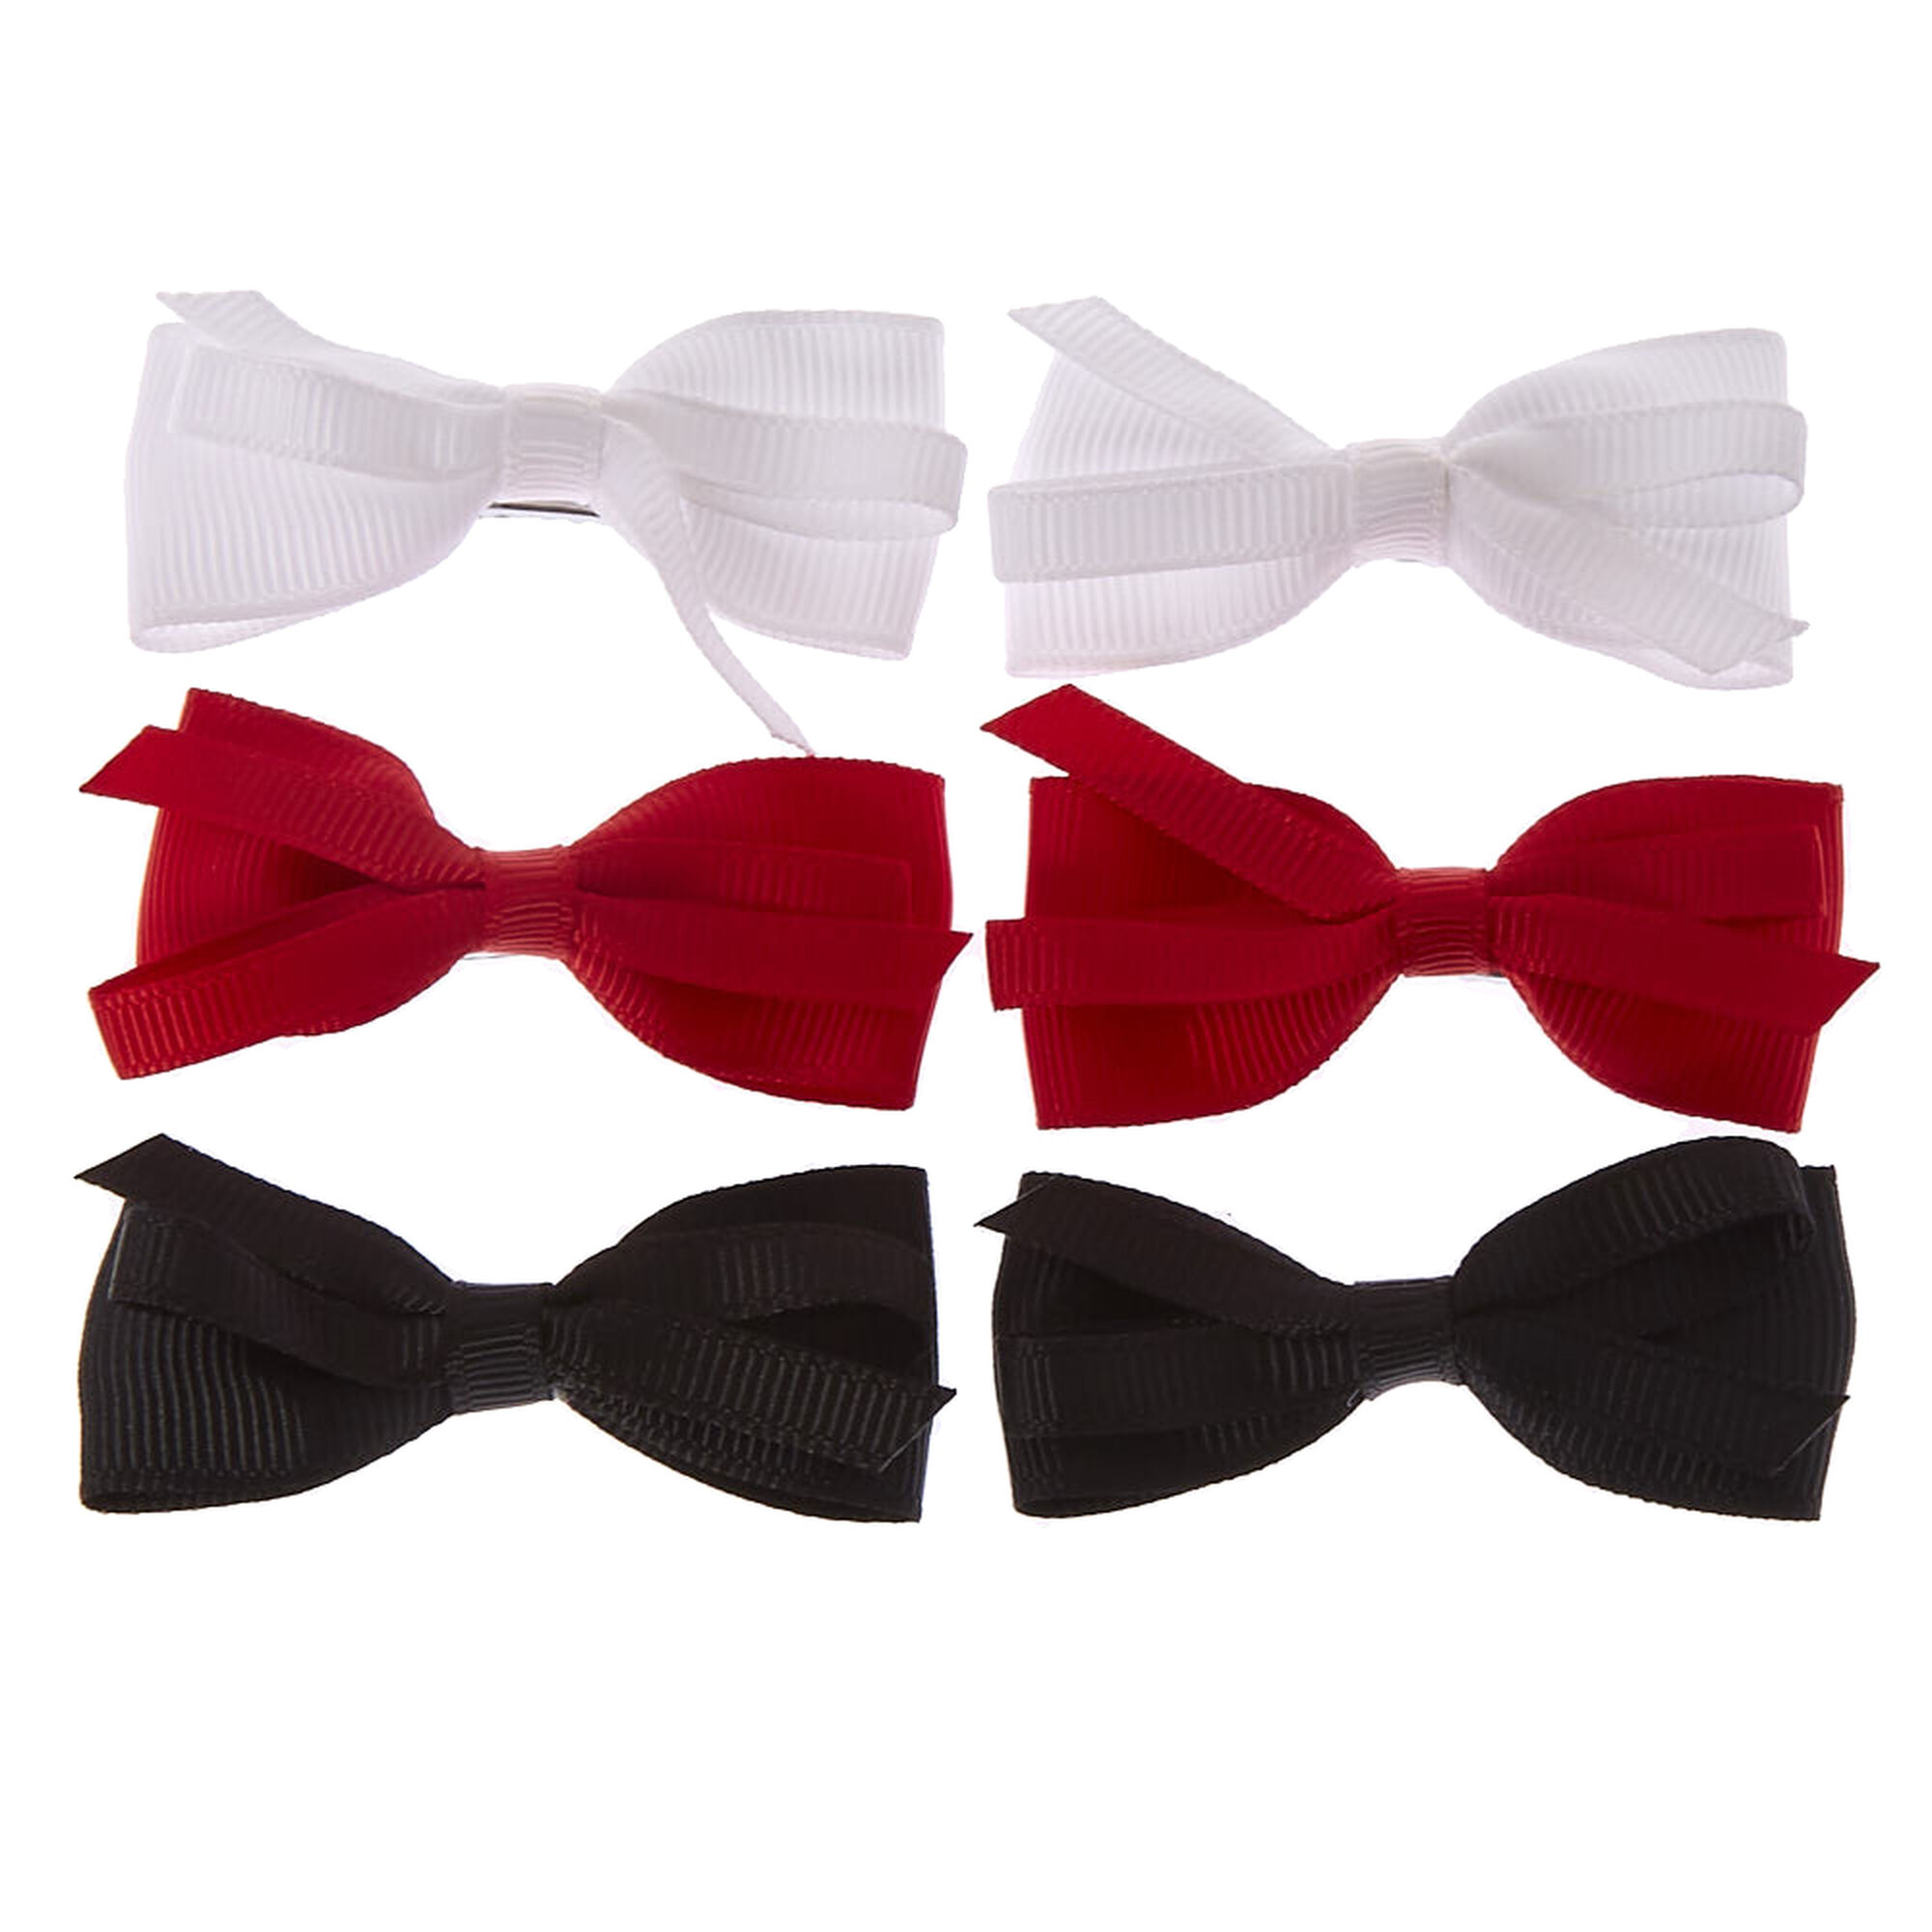 View Claires Club Preppy Hair Bow Clips 6 Pack information